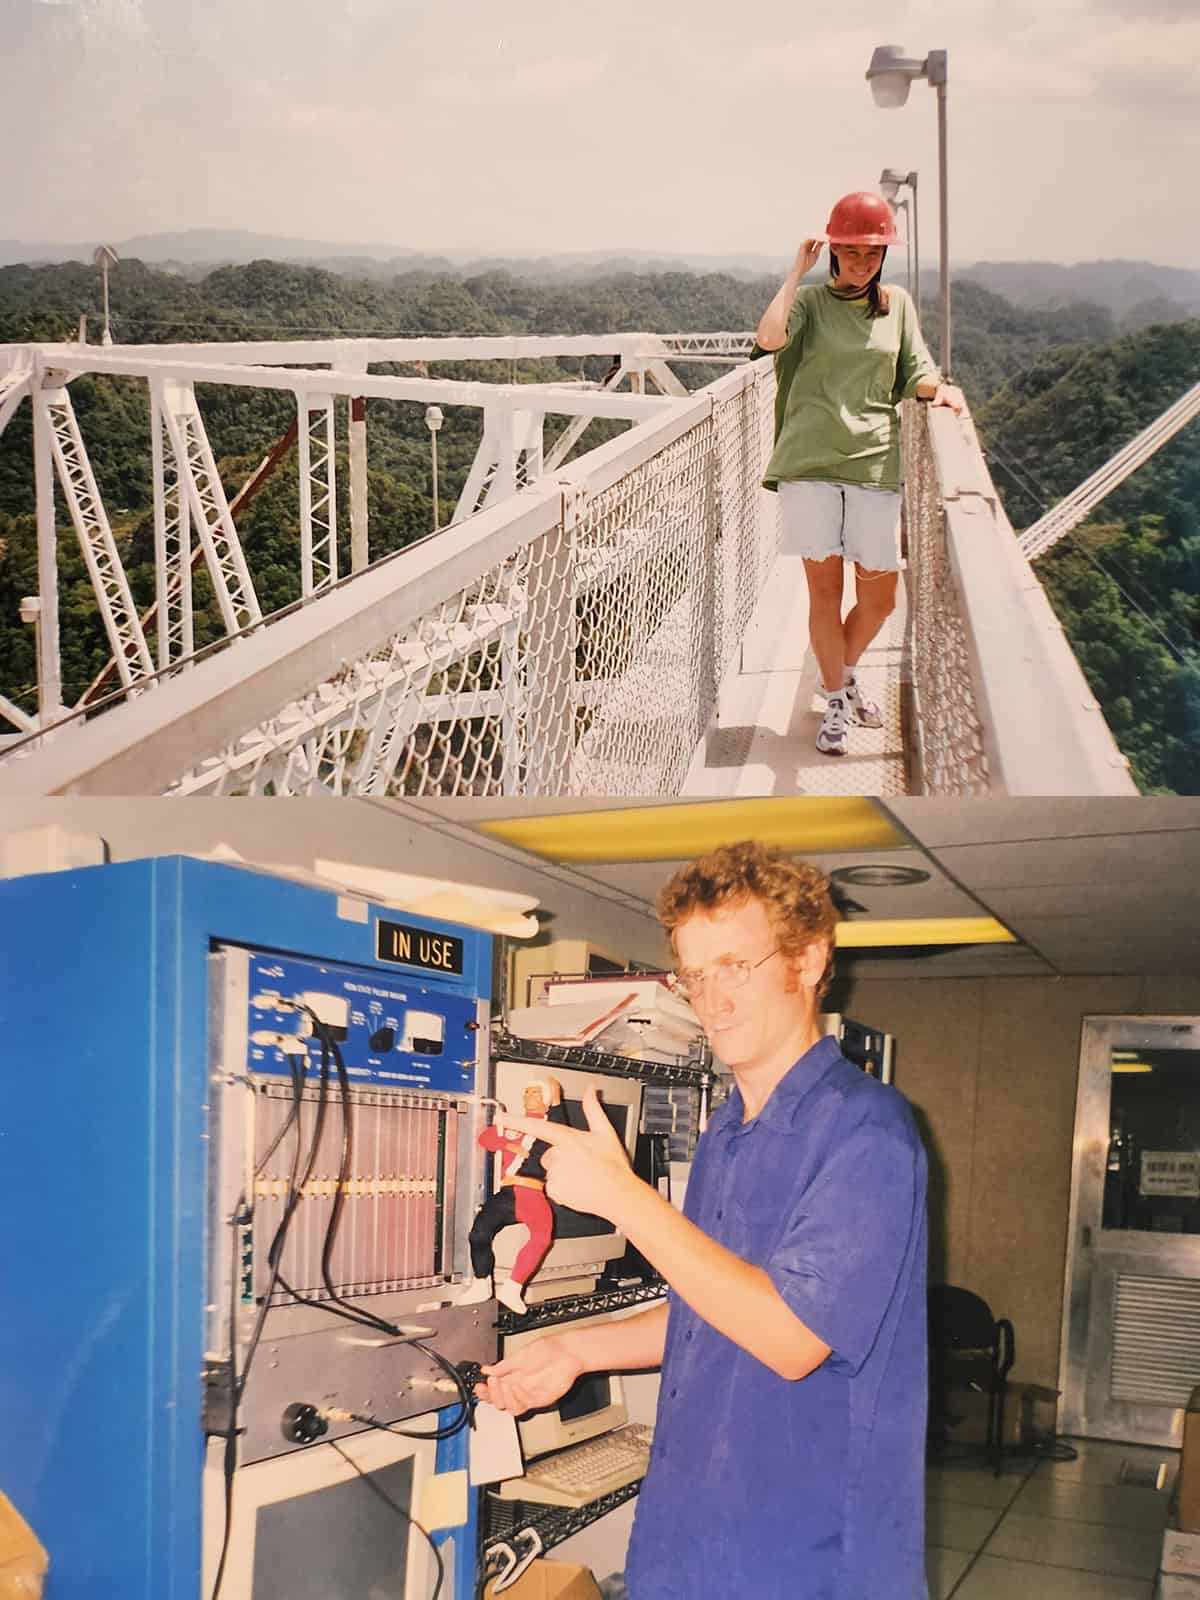 Two photos: a woman stood on a telescope gantry and a man in a control room